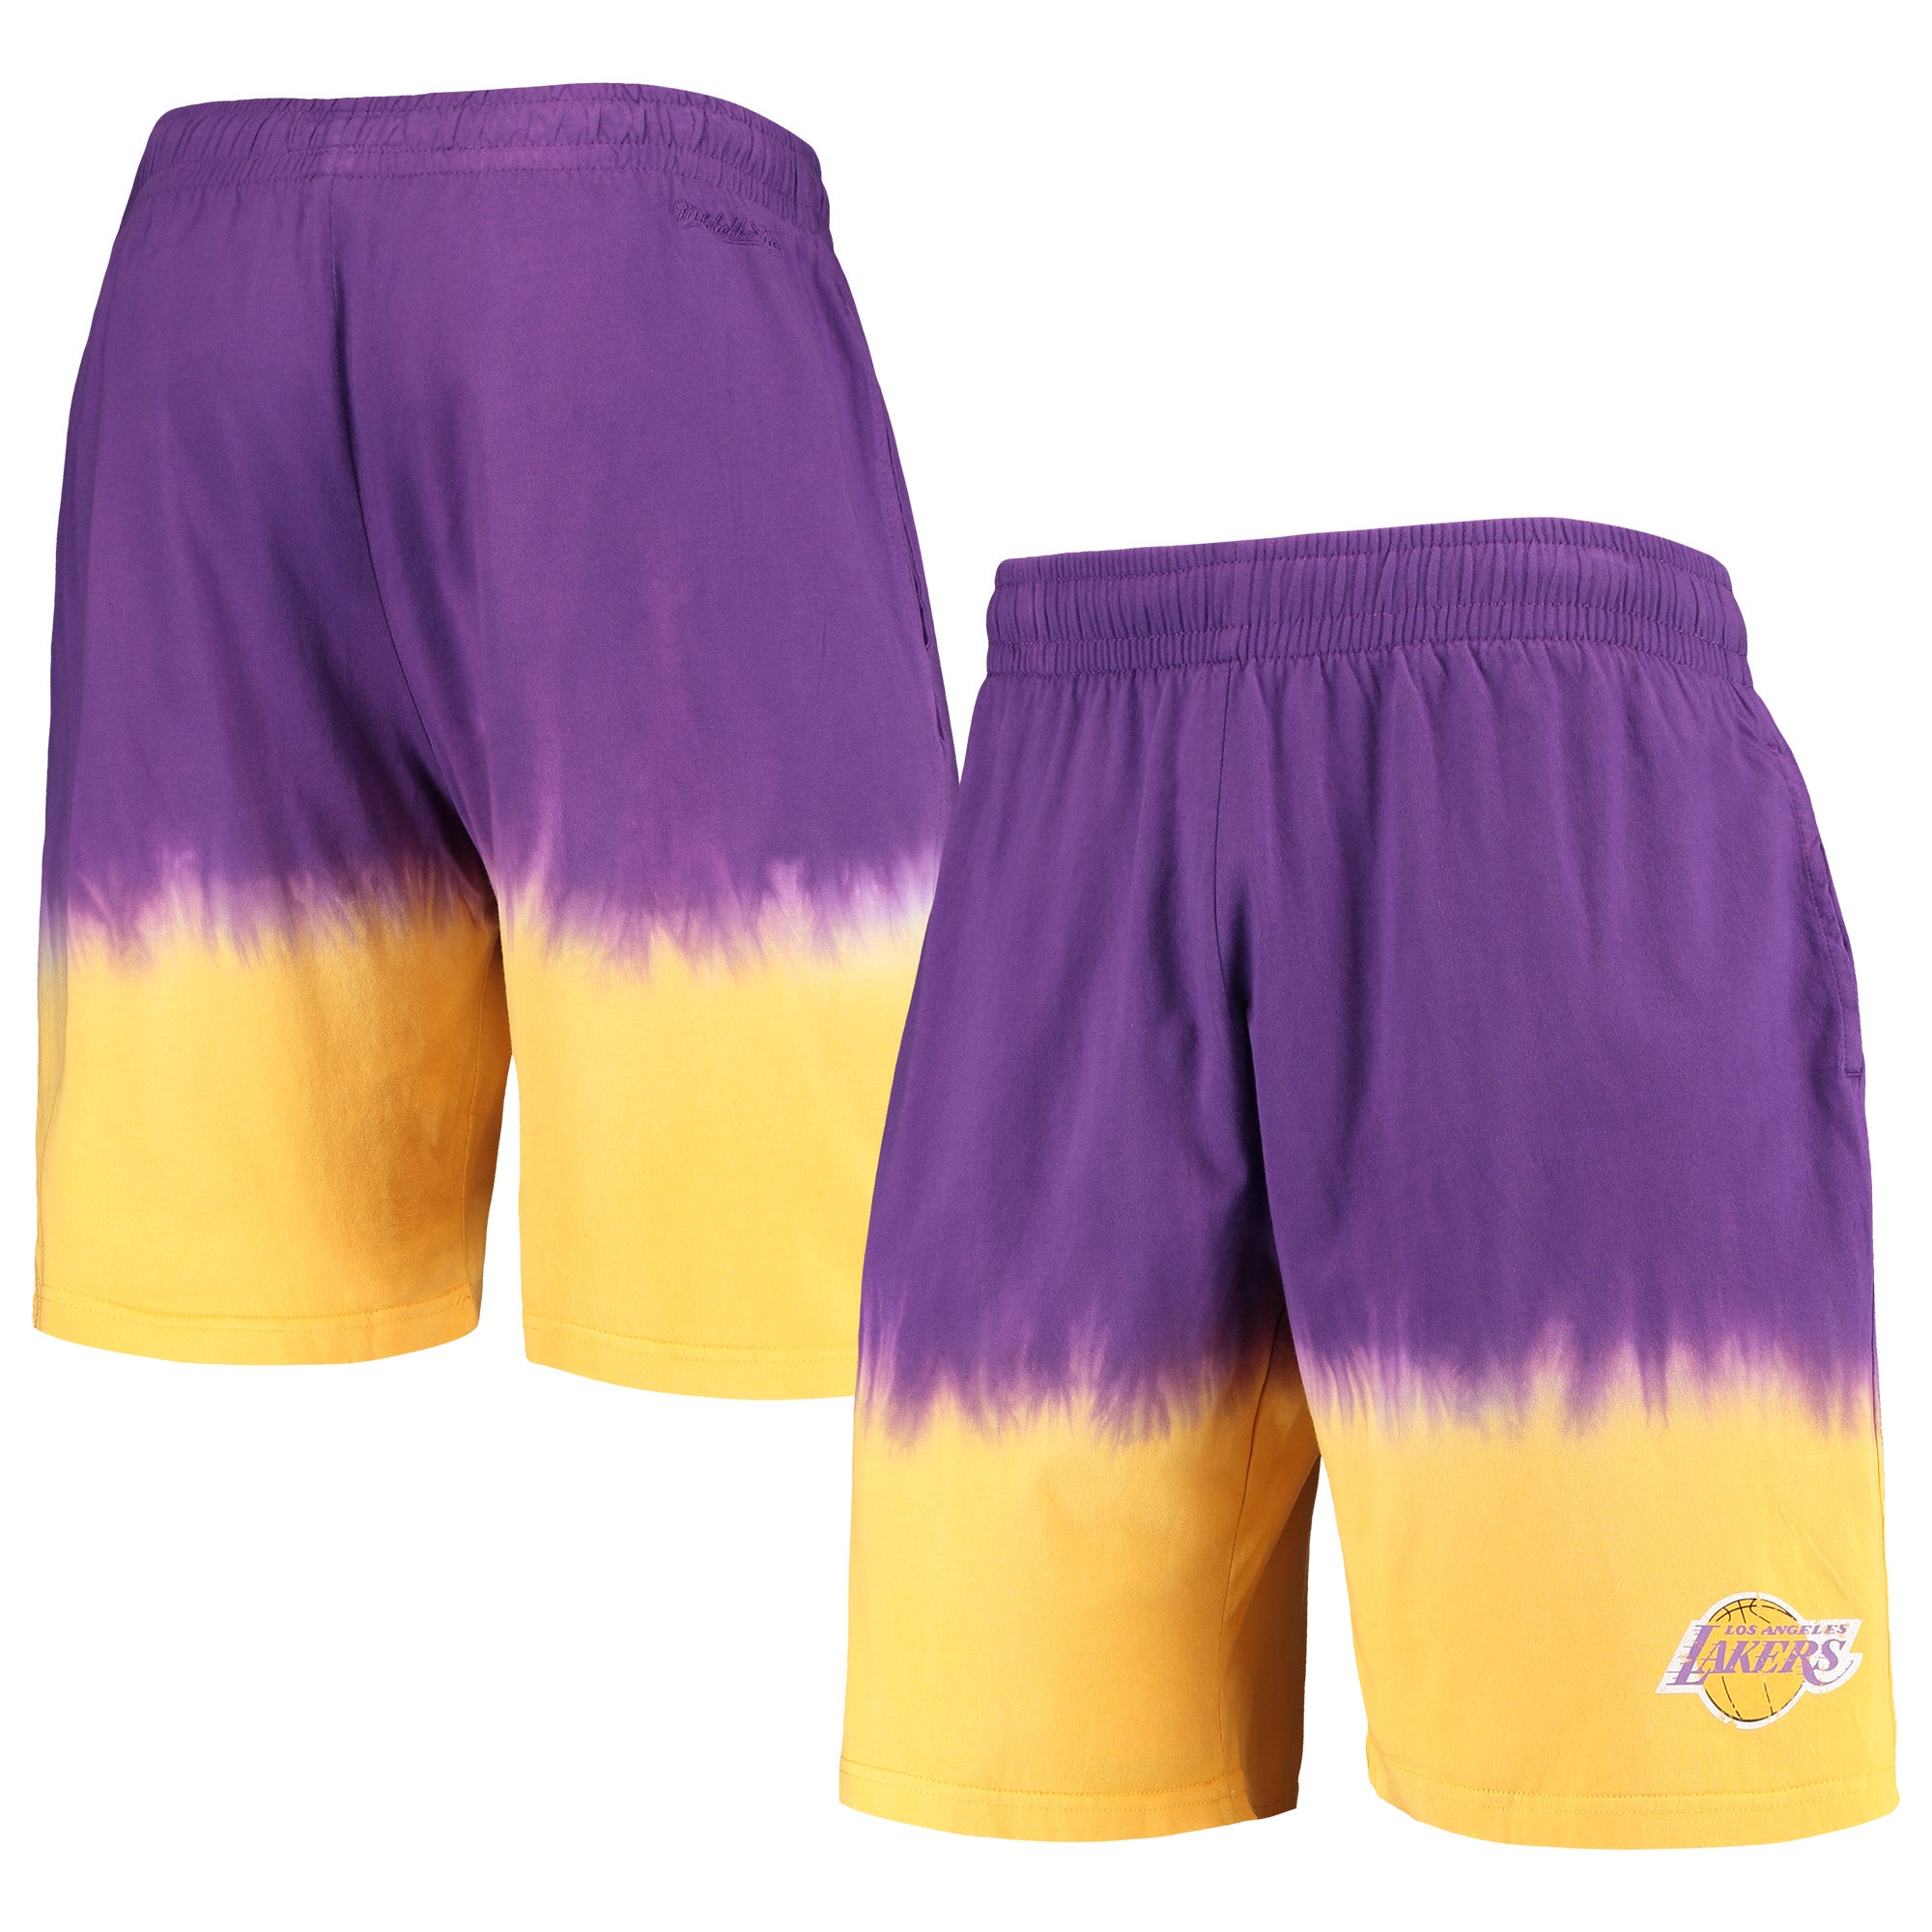 Authentic Shorts Los Angeles Lakers 2009-10 - Shop Mitchell & Ness